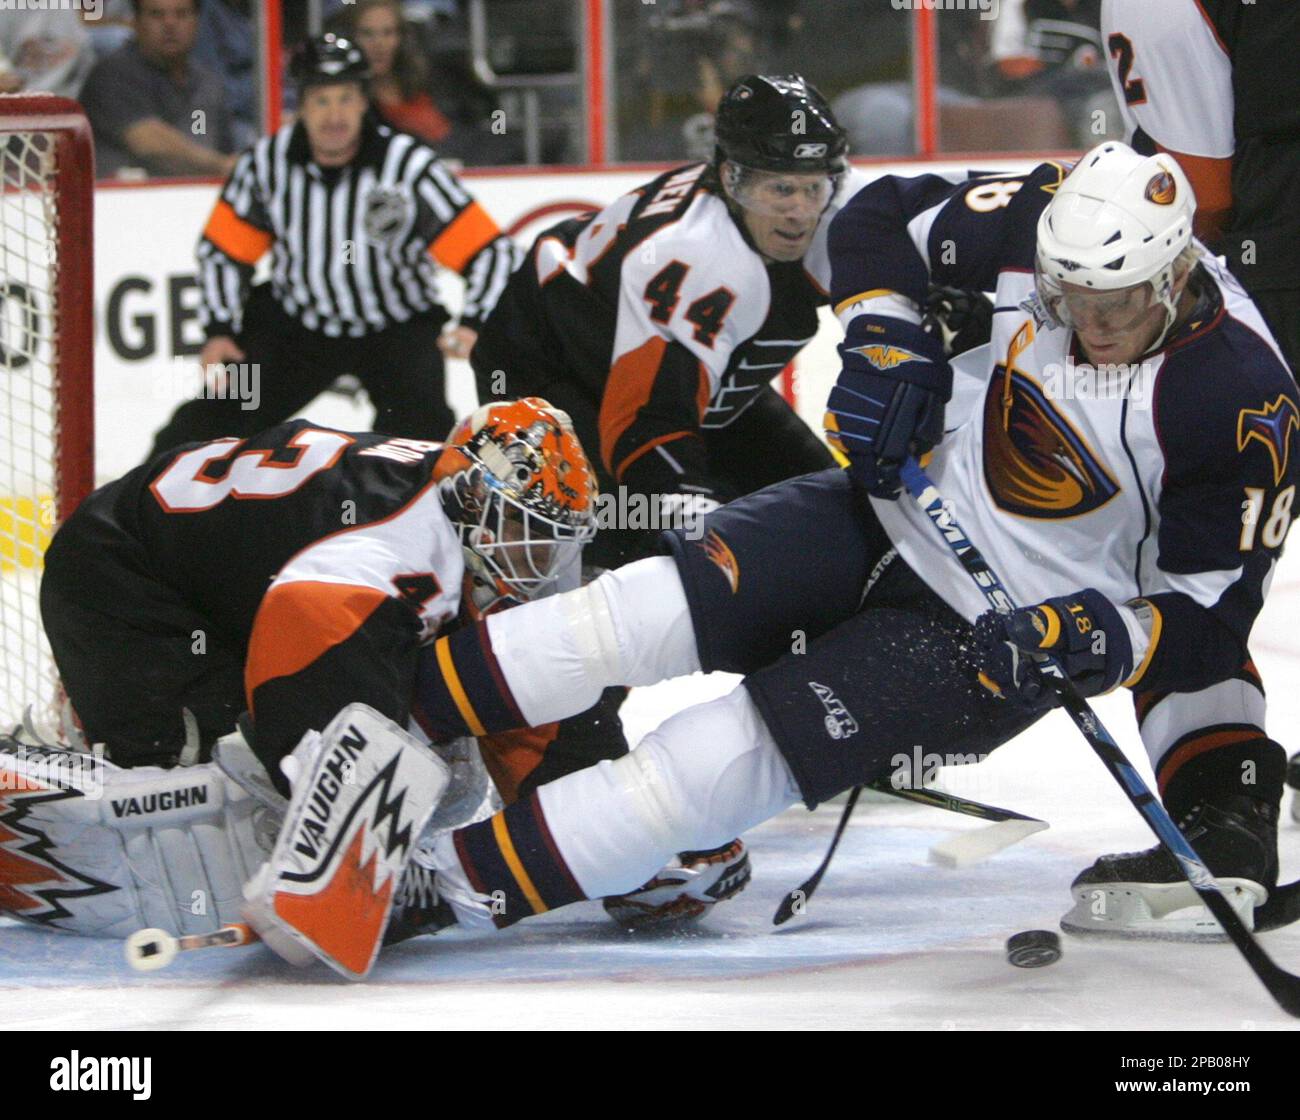 The Atlanta Thrashers' Marian Hossa (18) is defended by the Washington  Capitals' Mike Green (52) in the second period of their game at the Verizon  Center on Saturday, December 8, 2007, in